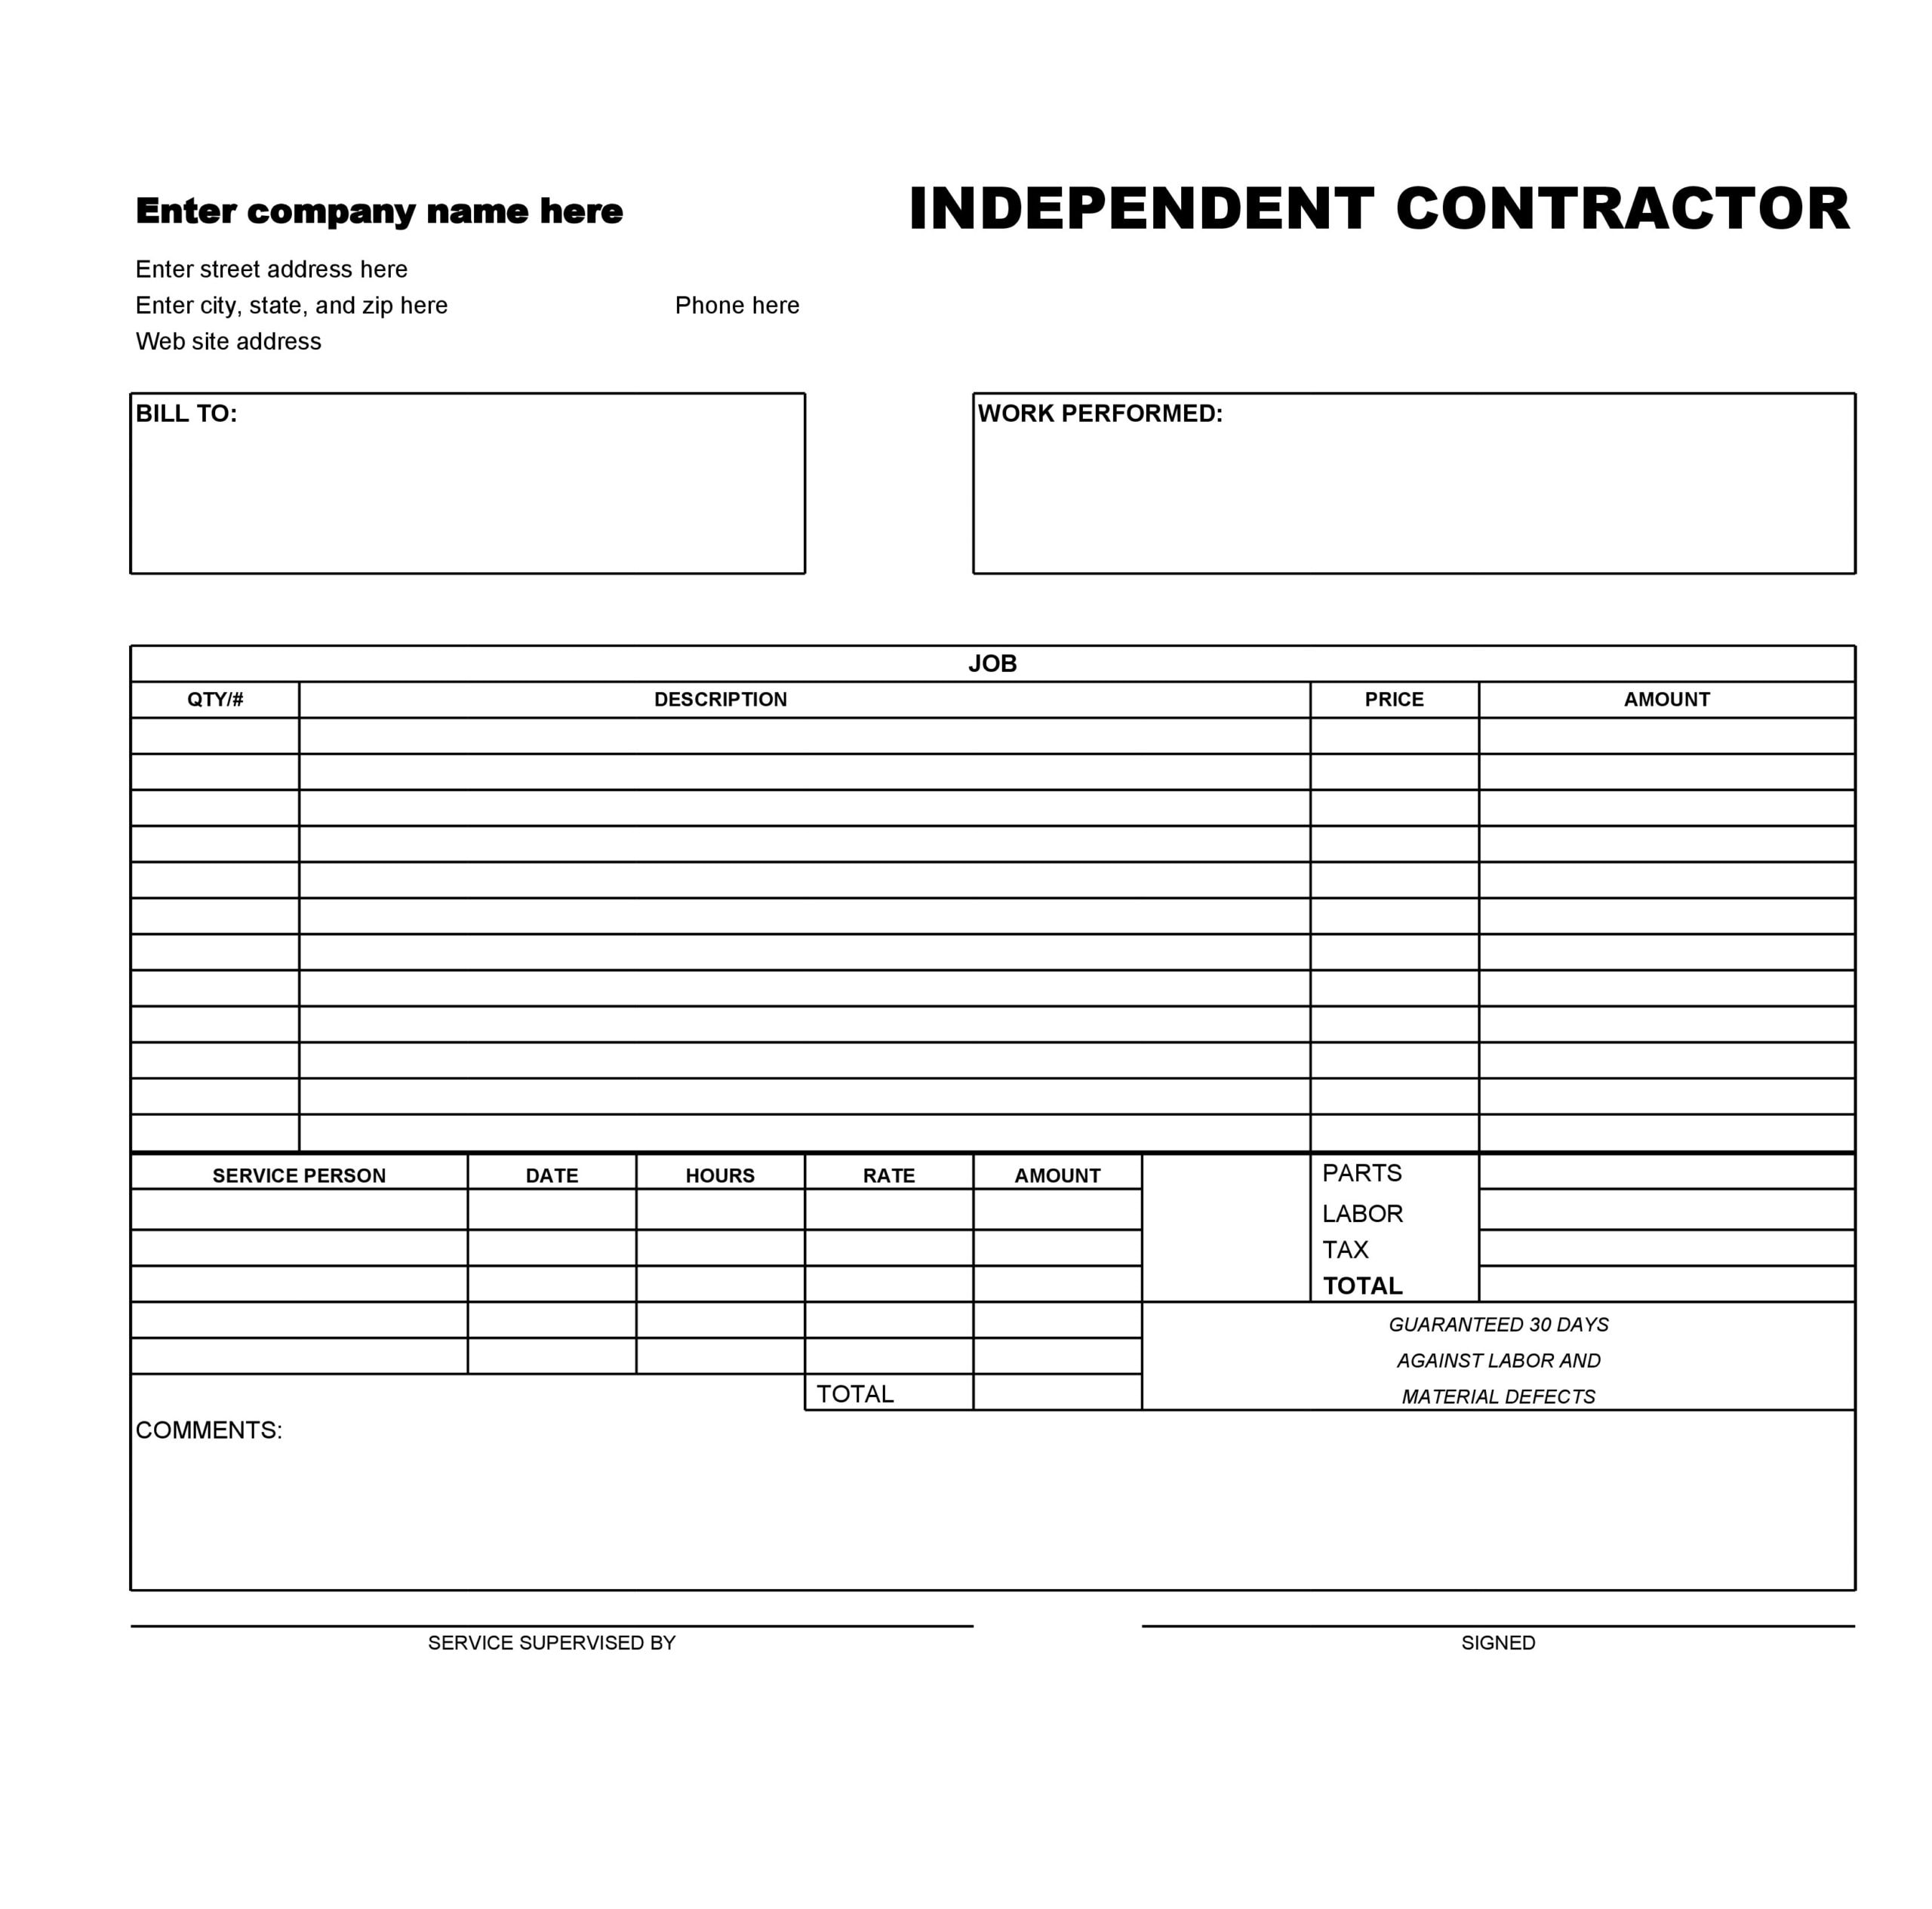 printable-independent-contractor-invoice-template-printable-templates